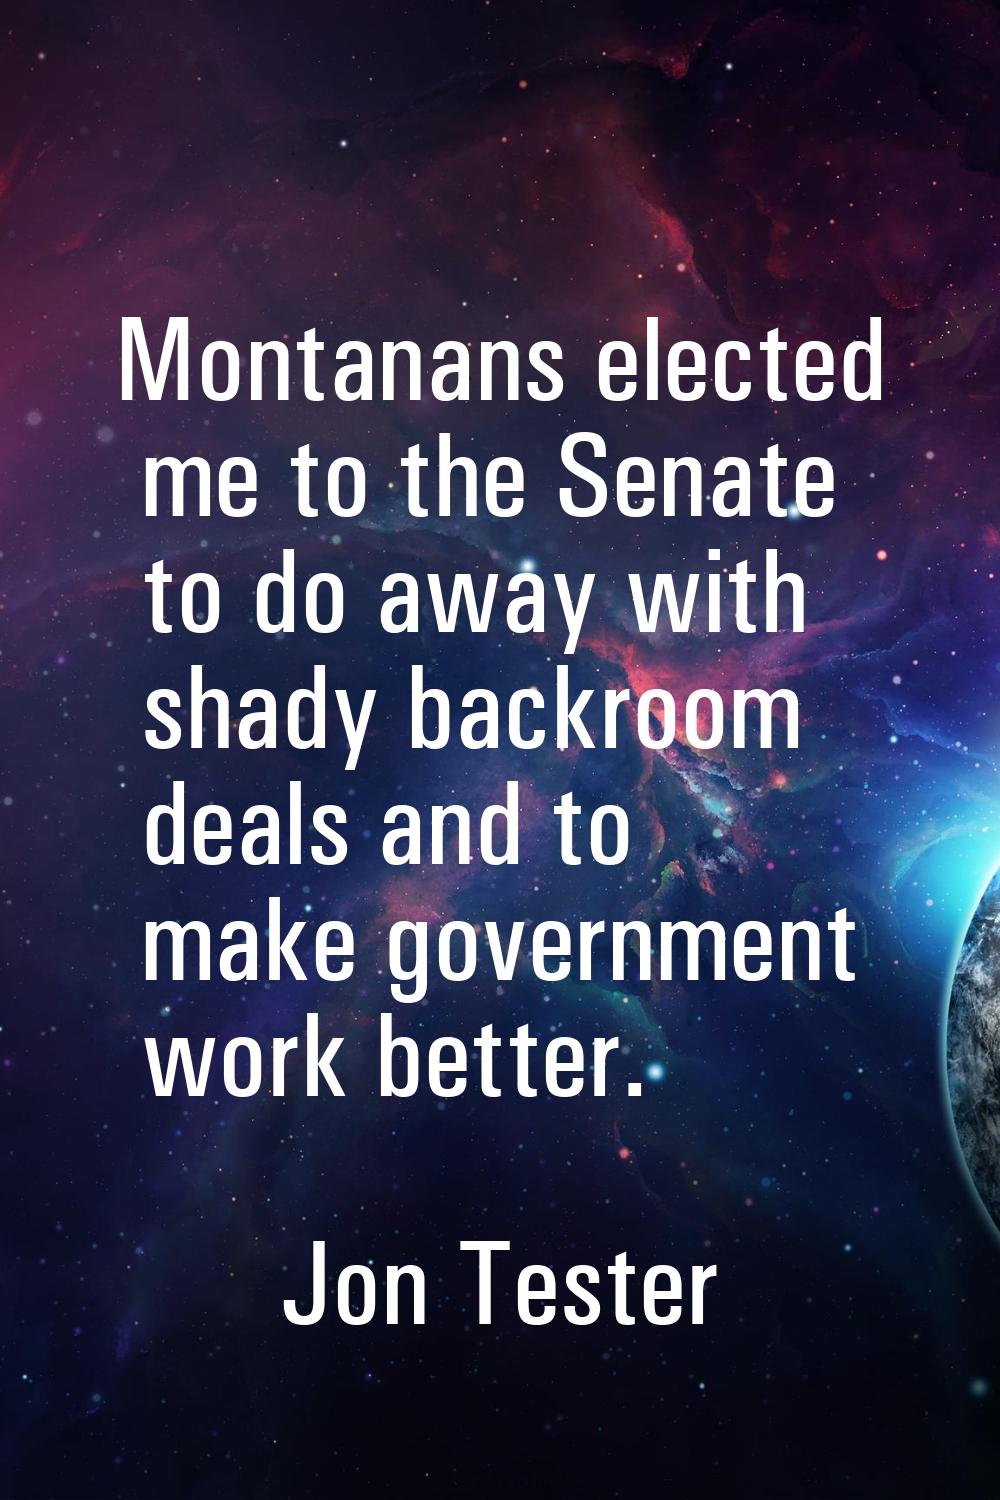 Montanans elected me to the Senate to do away with shady backroom deals and to make government work